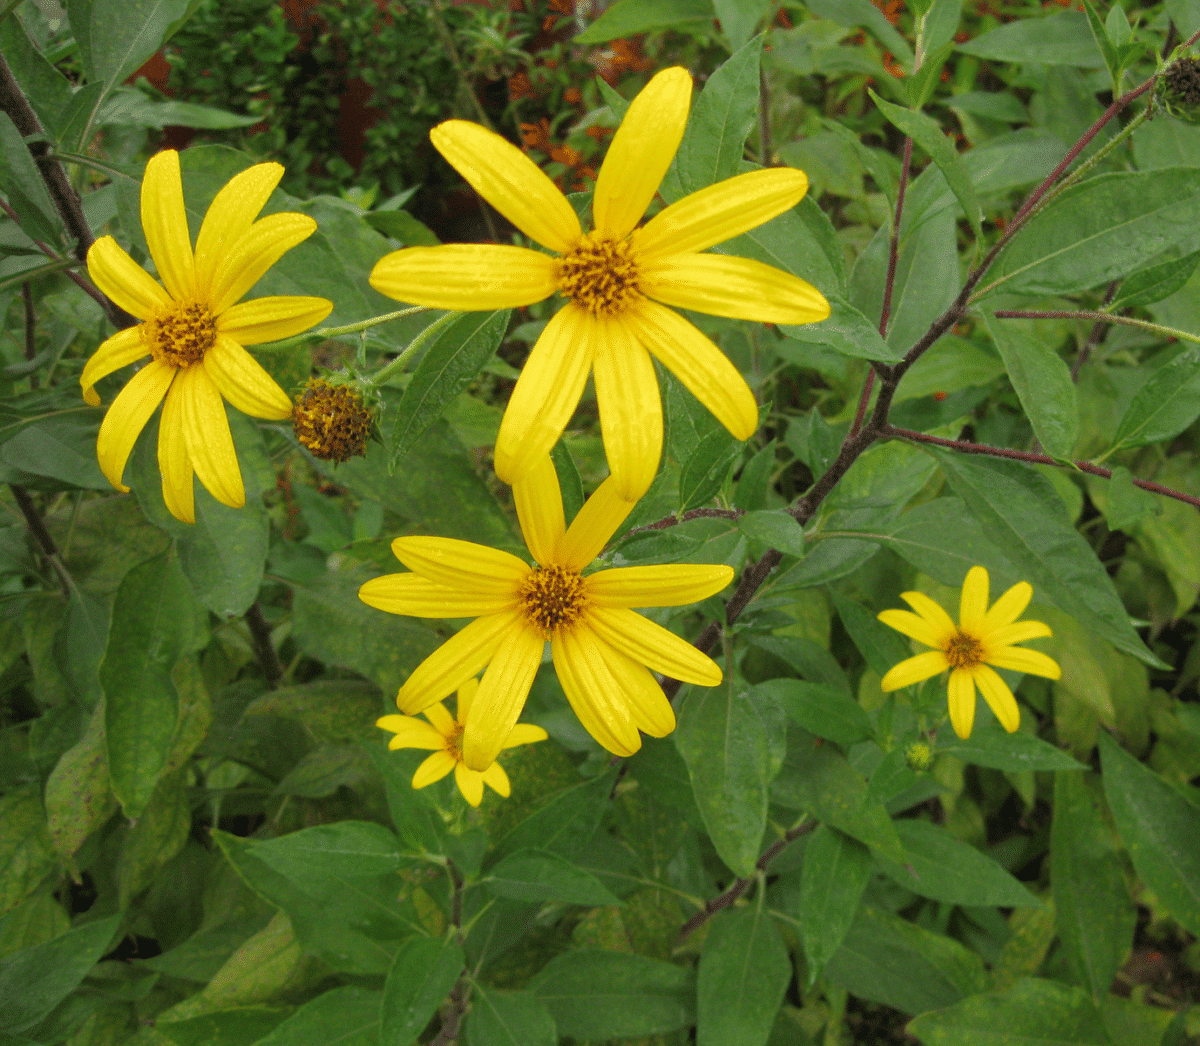 Now, Forager - Jerusalem Artichoke Flowers Issue 18 From Texas to Minnesota